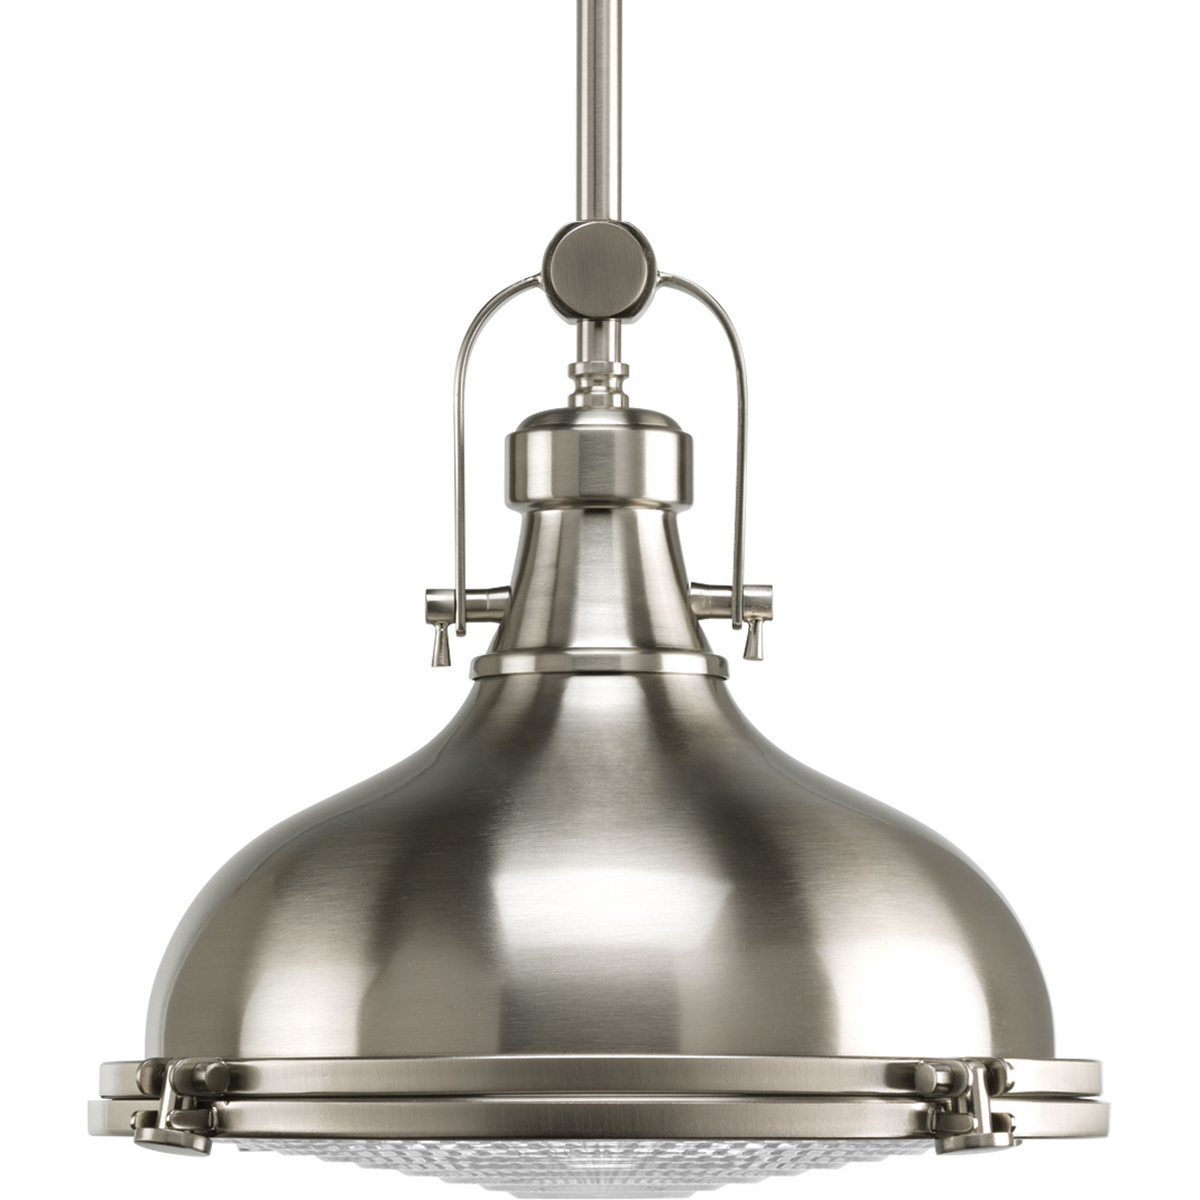 The one-light 12 in pendant features industrial roots in both form and function. The Oil Brushed Nickel finish highlight the high-quality prismatic glass which adds to the historical aesthetic. Antique style fixture includes a hinge-locking nautical design. Perfect above a kitchen island in pairs or threes, use for additional ambience or task lighting in, breakfast nooks, islands, offices, and dining rooms or anywhere a pendant light can be placed. 3000k, 90+ CRI 1,211 lumens 71.2 lumens/watt per module (source).